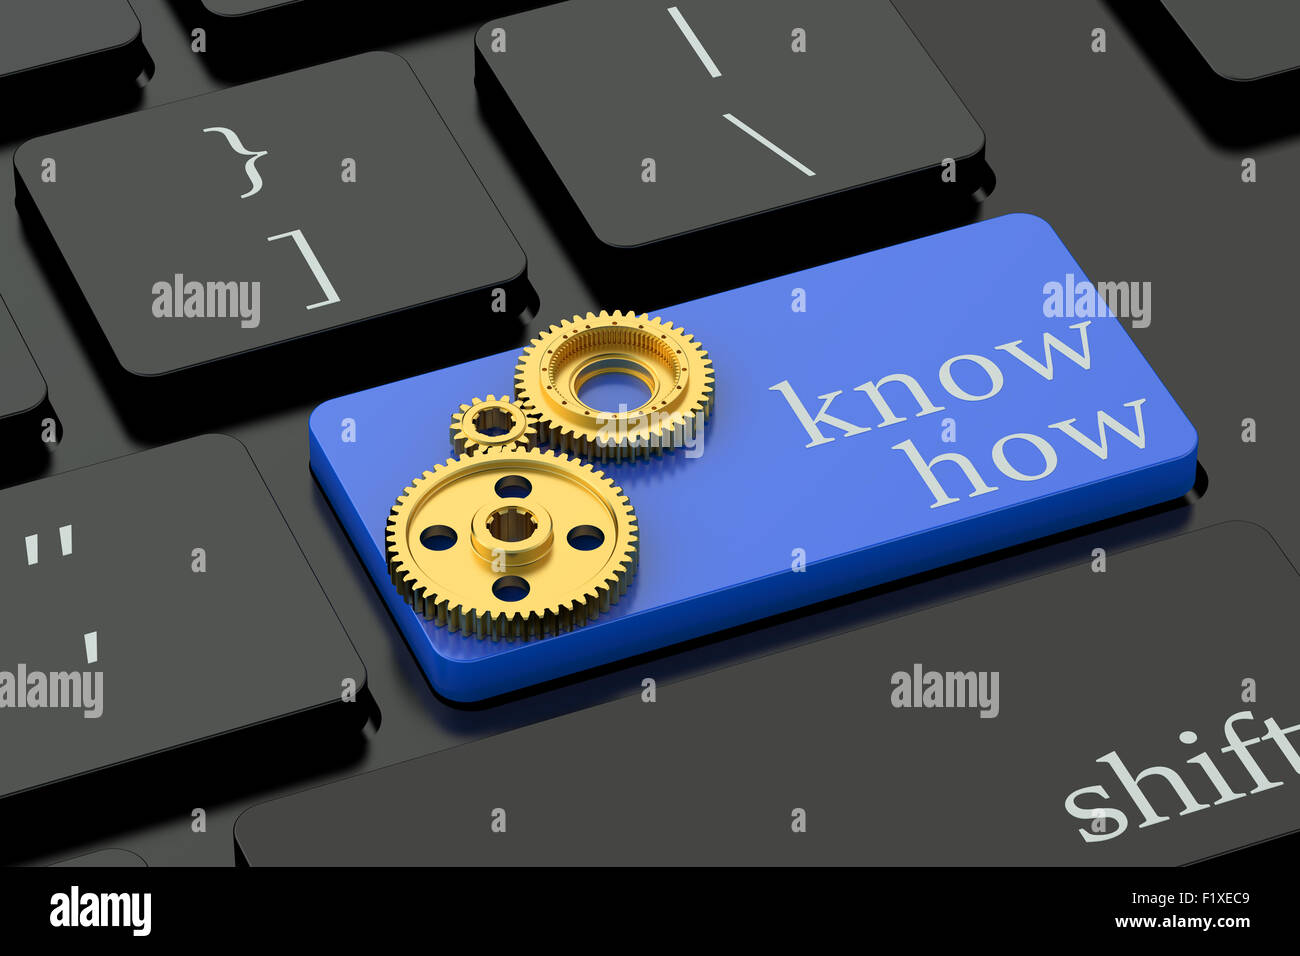 Know How concept on blue keyboard button Stock Photo